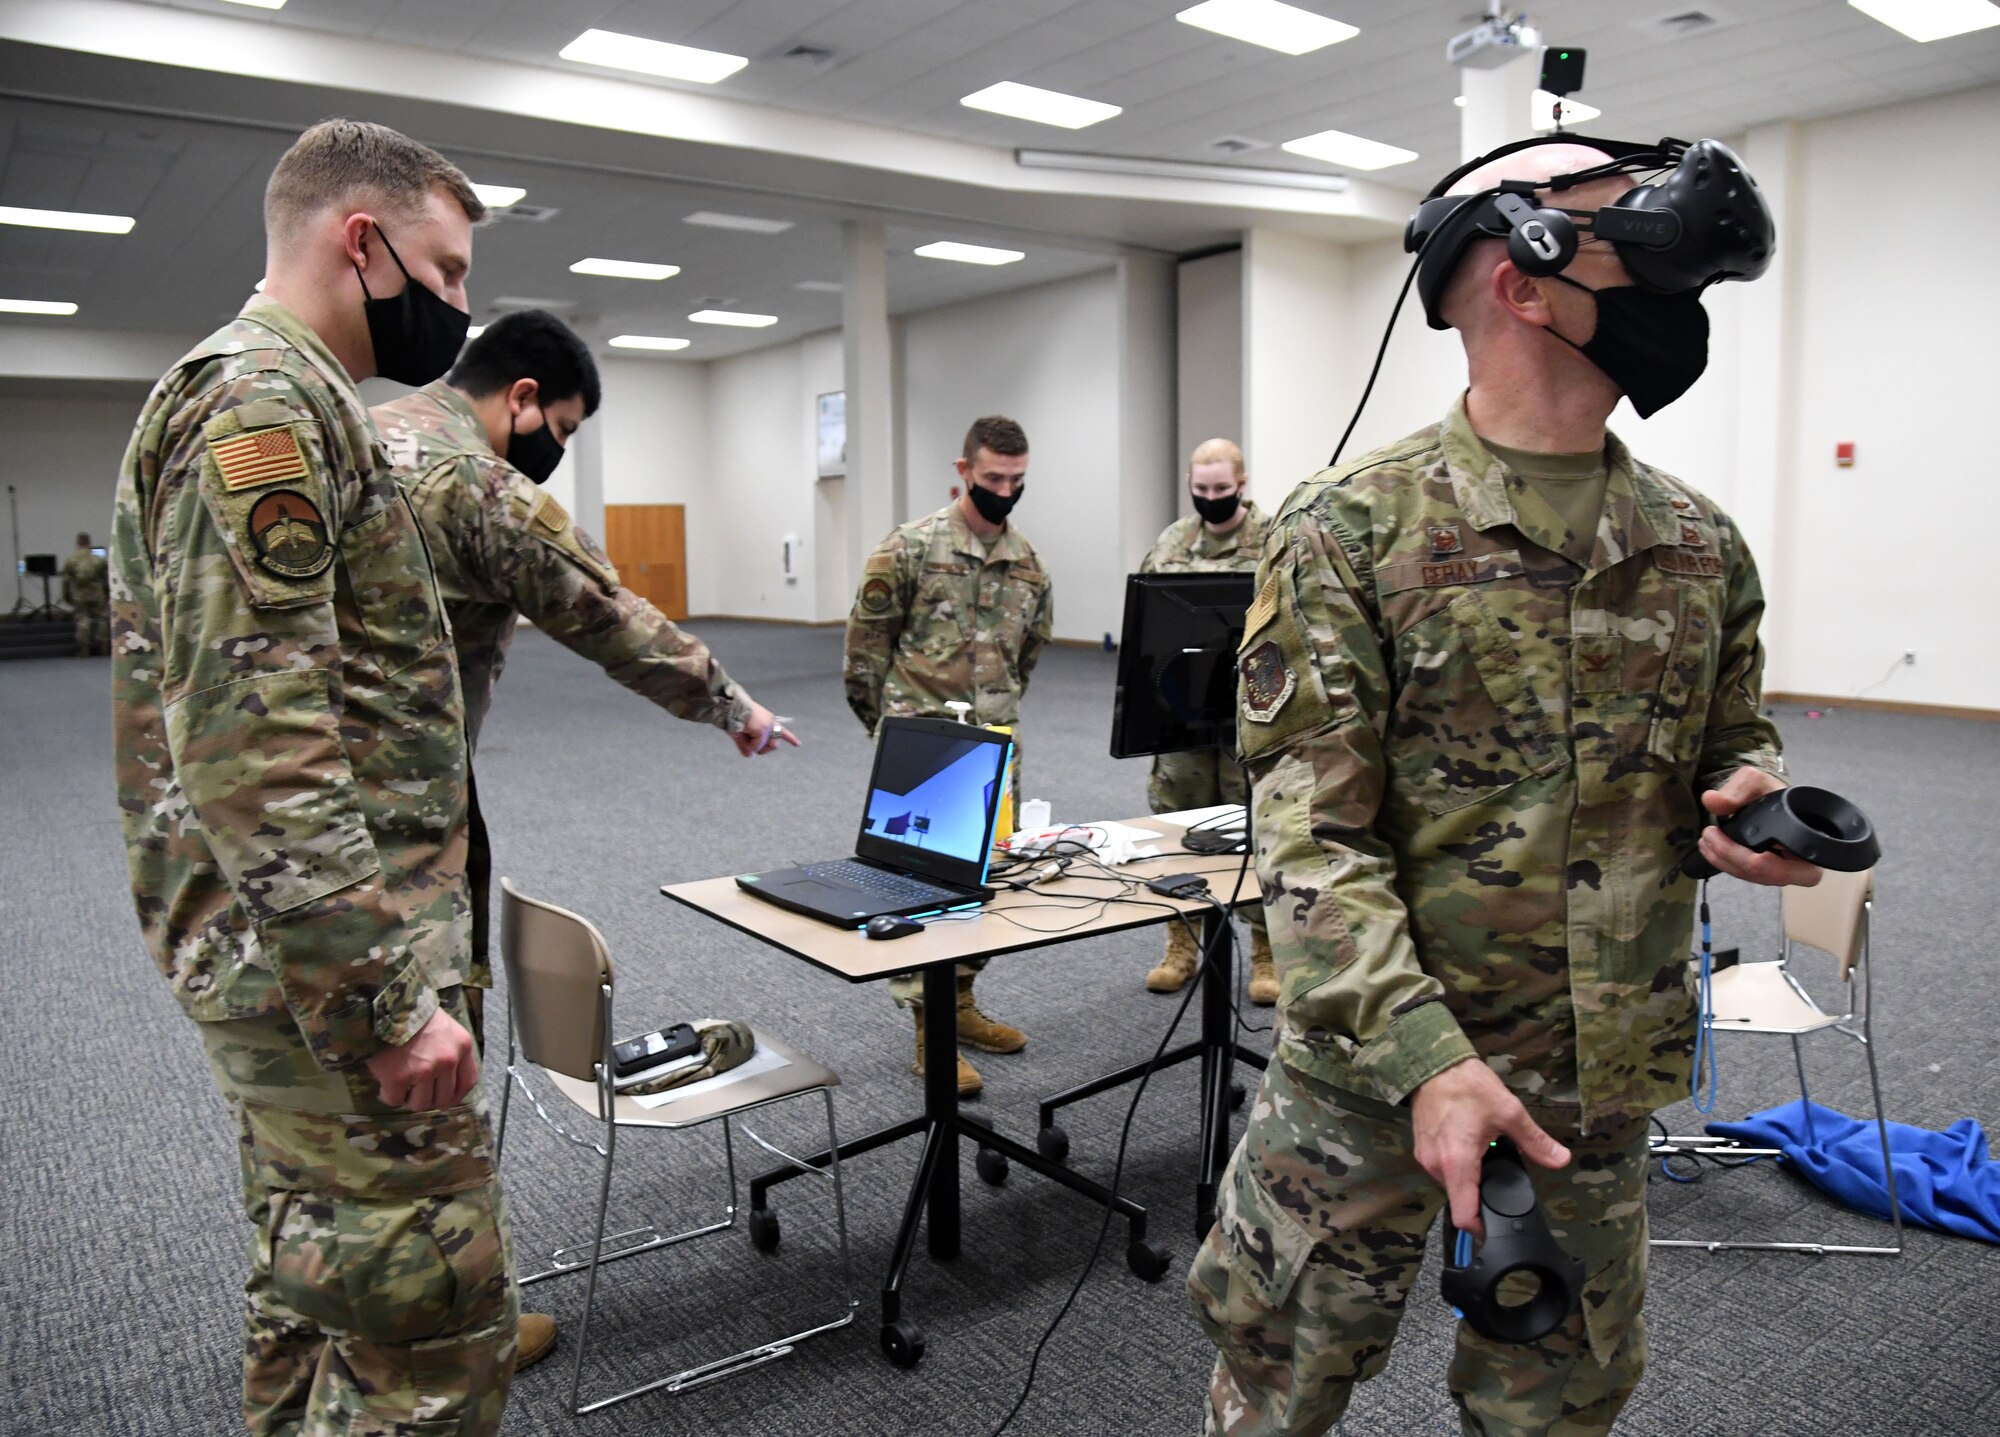 U.S. Air Force Col. Chance Geray, 81st Training Group commander, participates in a 334th Training Squadron air traffic control tower virtual reality demonstration during the 81st TRG Mock Tech Expo inside the Roberts Consolidated Aircraft Maintenance Facility at Keesler Air Force Base, Mississippi, Jan. 27, 2021. The 81st TRG level event was designed to prepare Keesler's nine innovation projects for the Air Education and Training Command level exposition. (U.S. Air Force photo by Kemberly Groue)